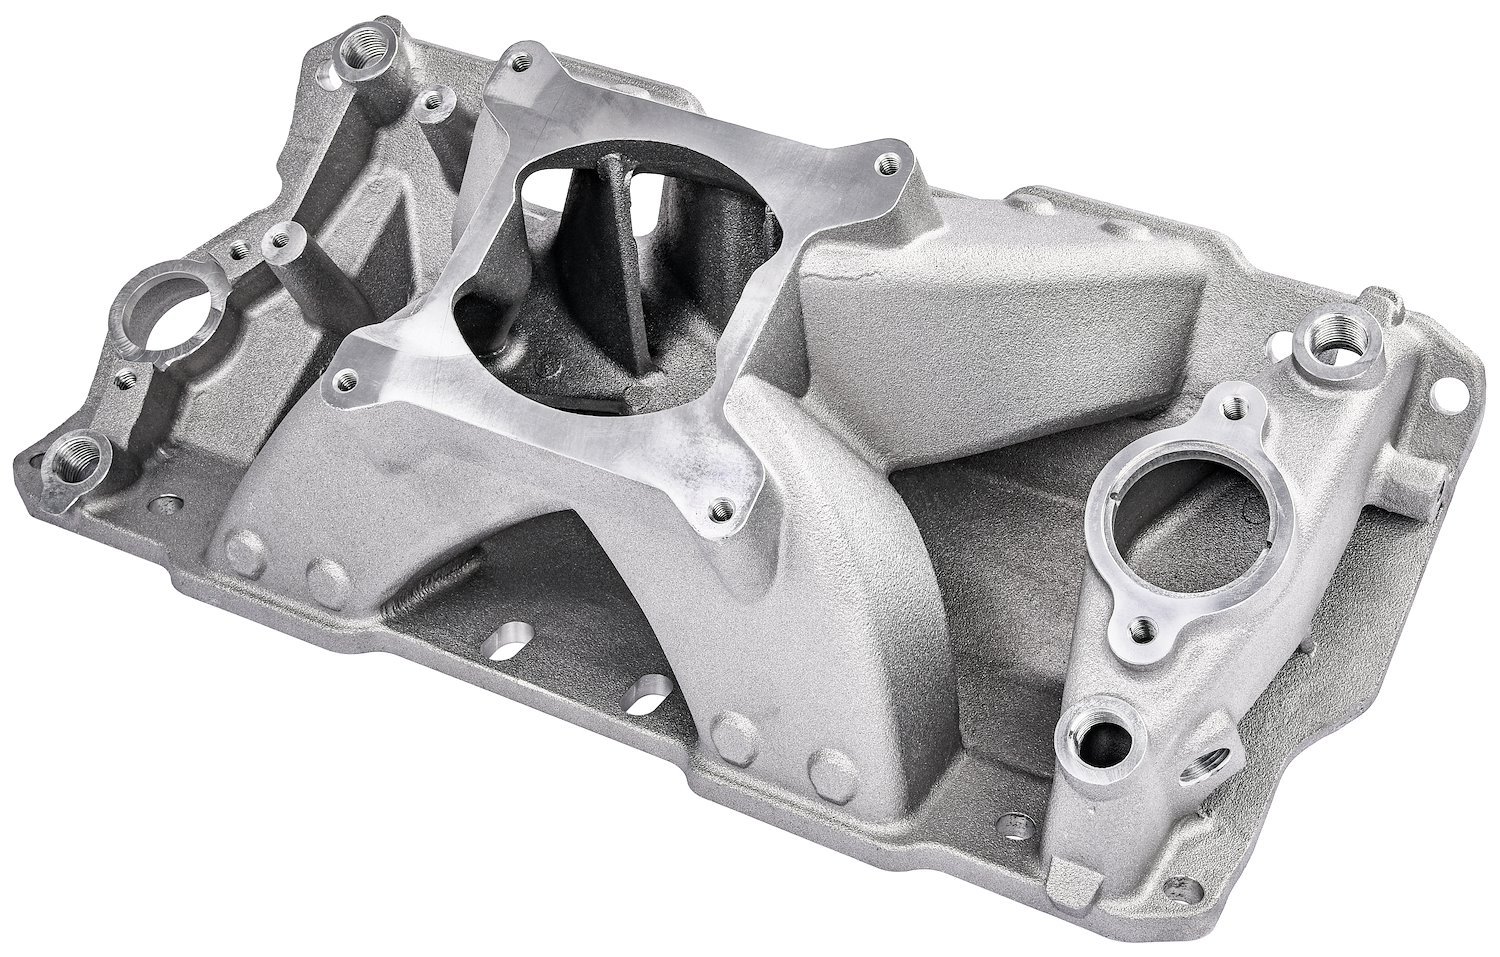 Intake Manifold for 1955-1995 Small Block Chevy 262-400,